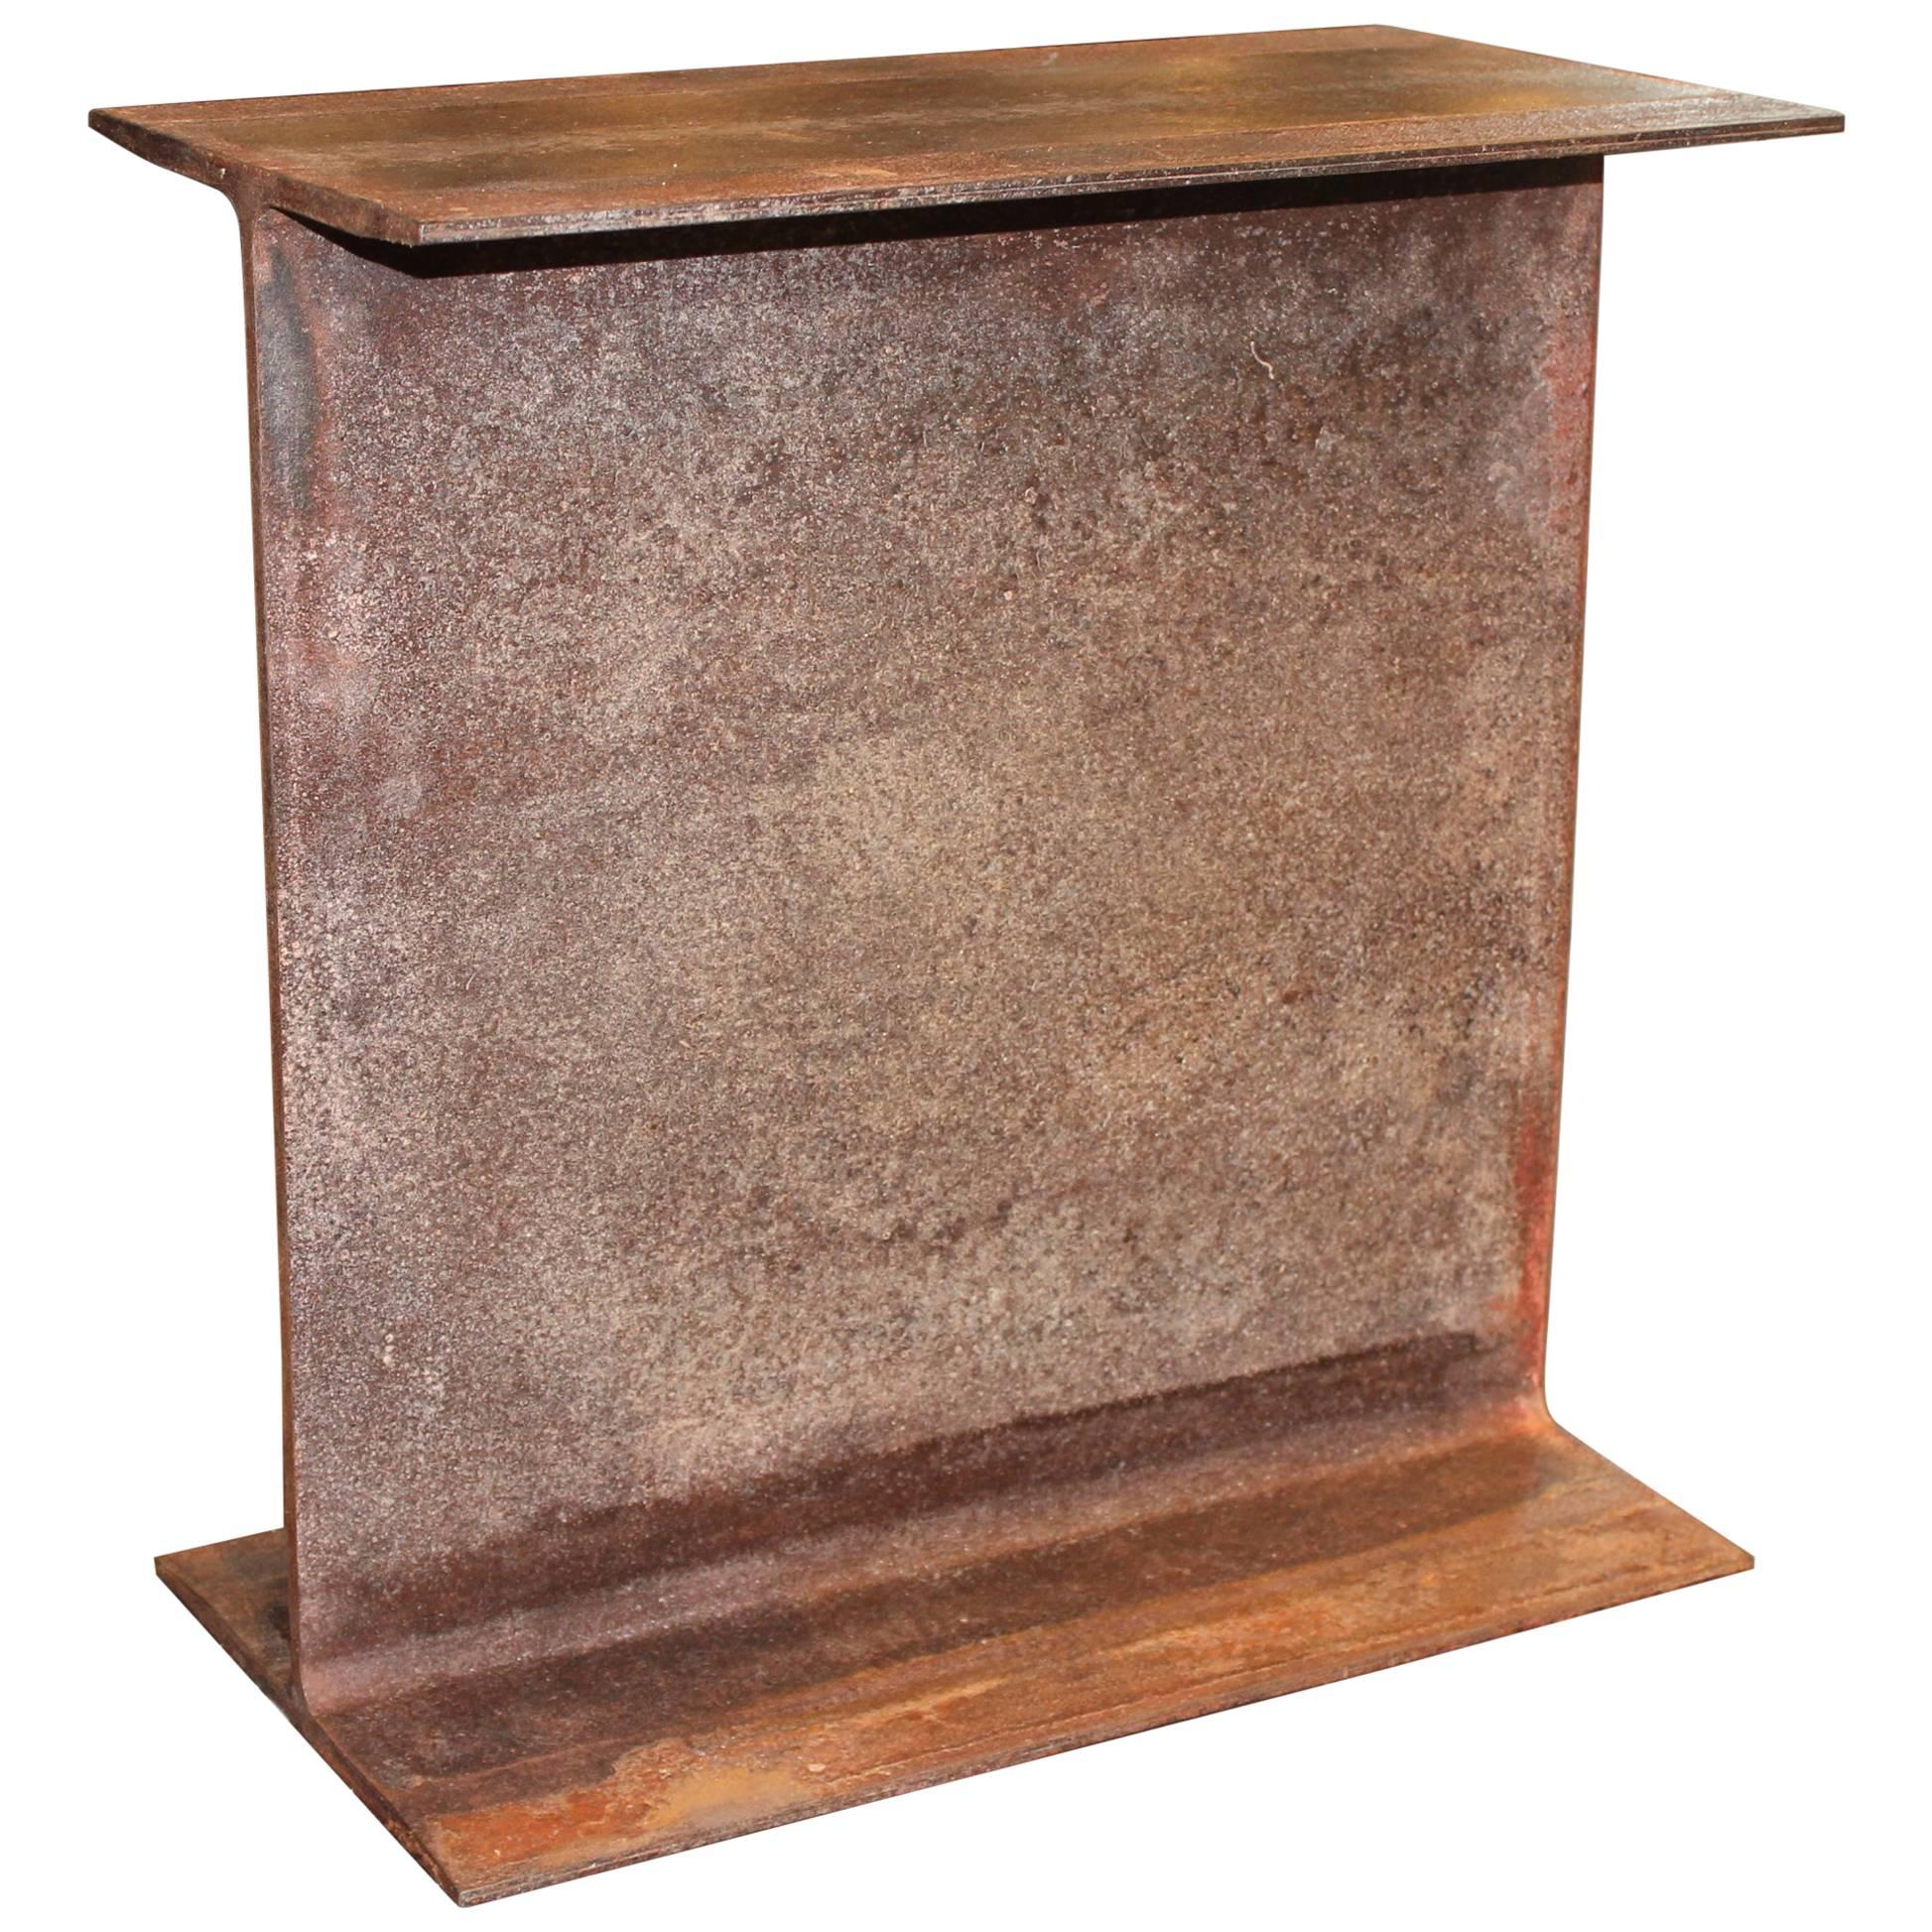 The "I" Beam End Table. Black Mottled Patina.